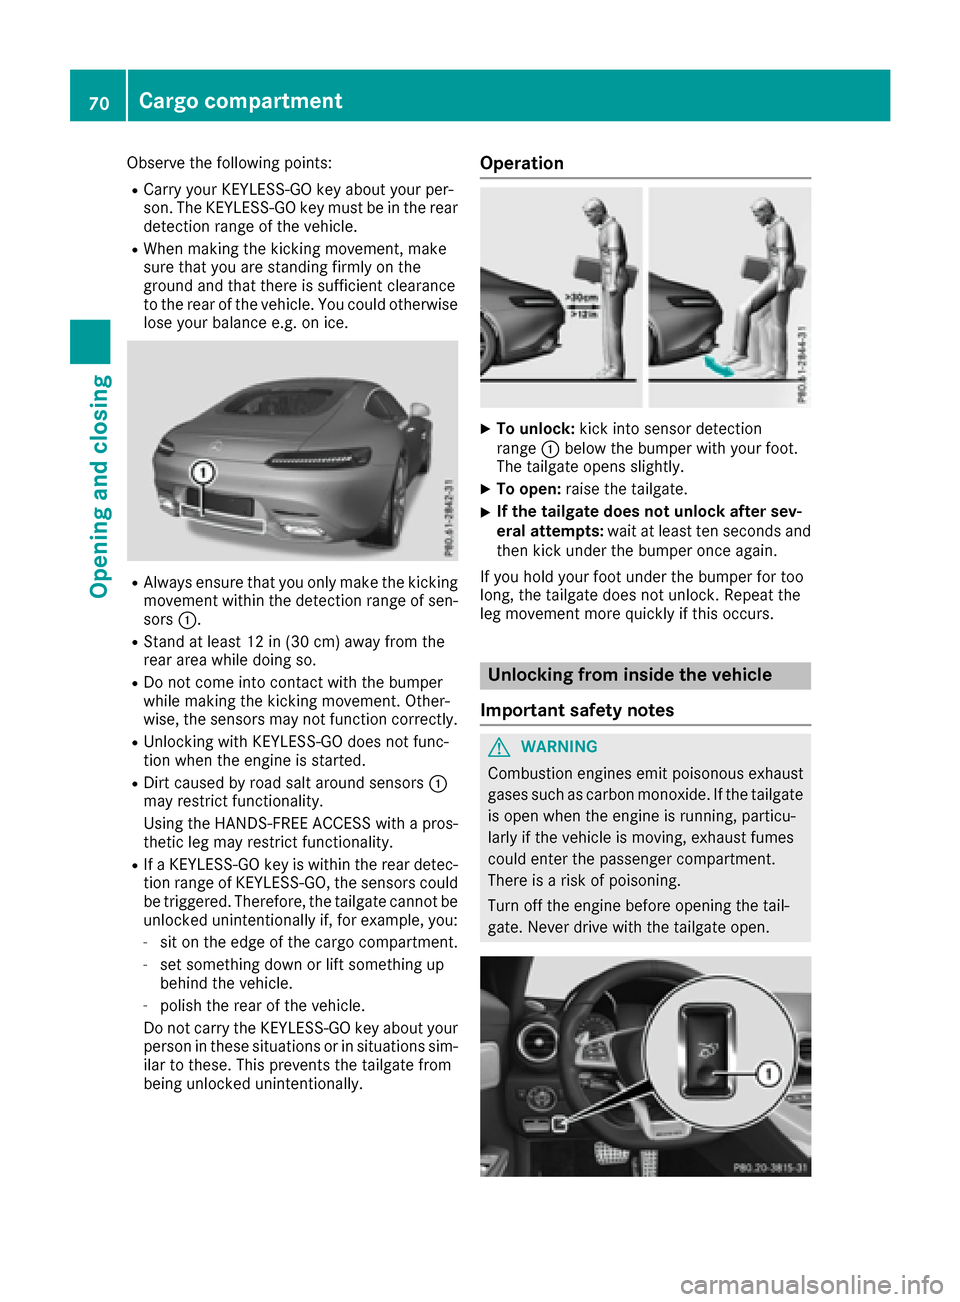 MERCEDES-BENZ AMG GT S 2016 C190 Manual PDF Observe the following points:
RCarry your KEYLESS-GO key about your per-
son. The KEYLESS-GO key must be in the rear
detection range of the vehicle.
RWhen making the kicking movement, make
sure that y